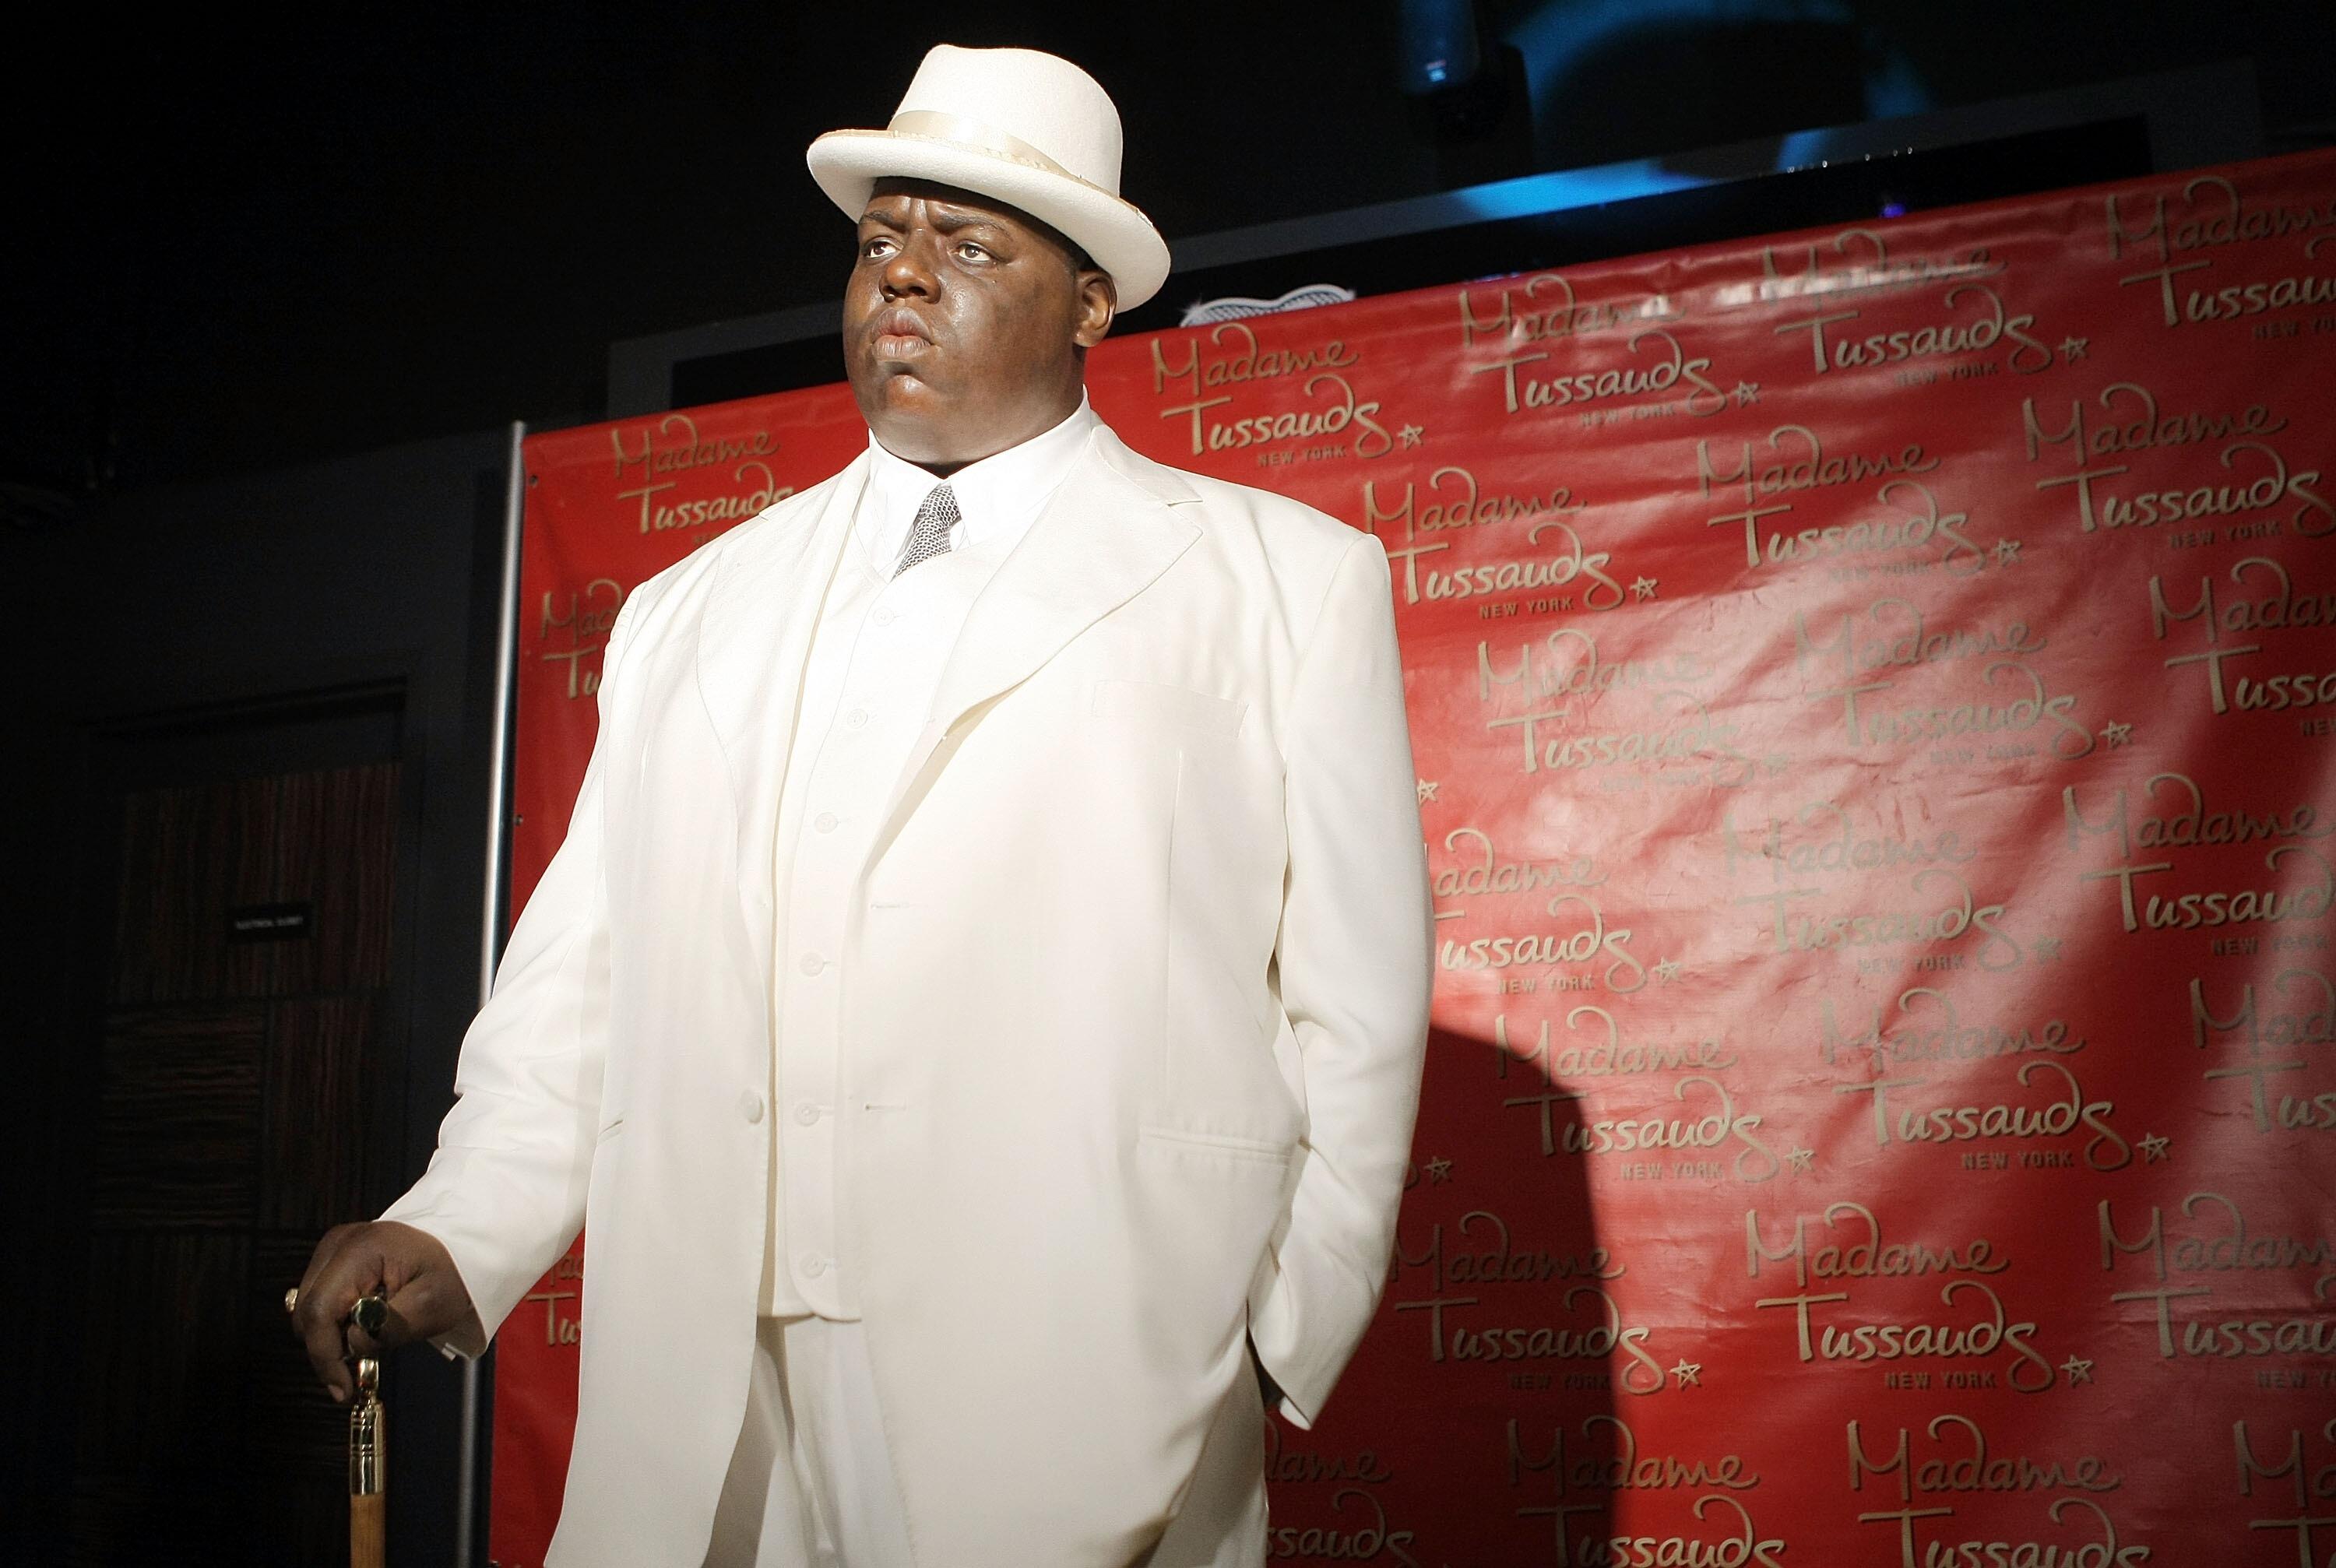 An Orchestral Tribute to the Notorious B.I.G. · Lincoln Center